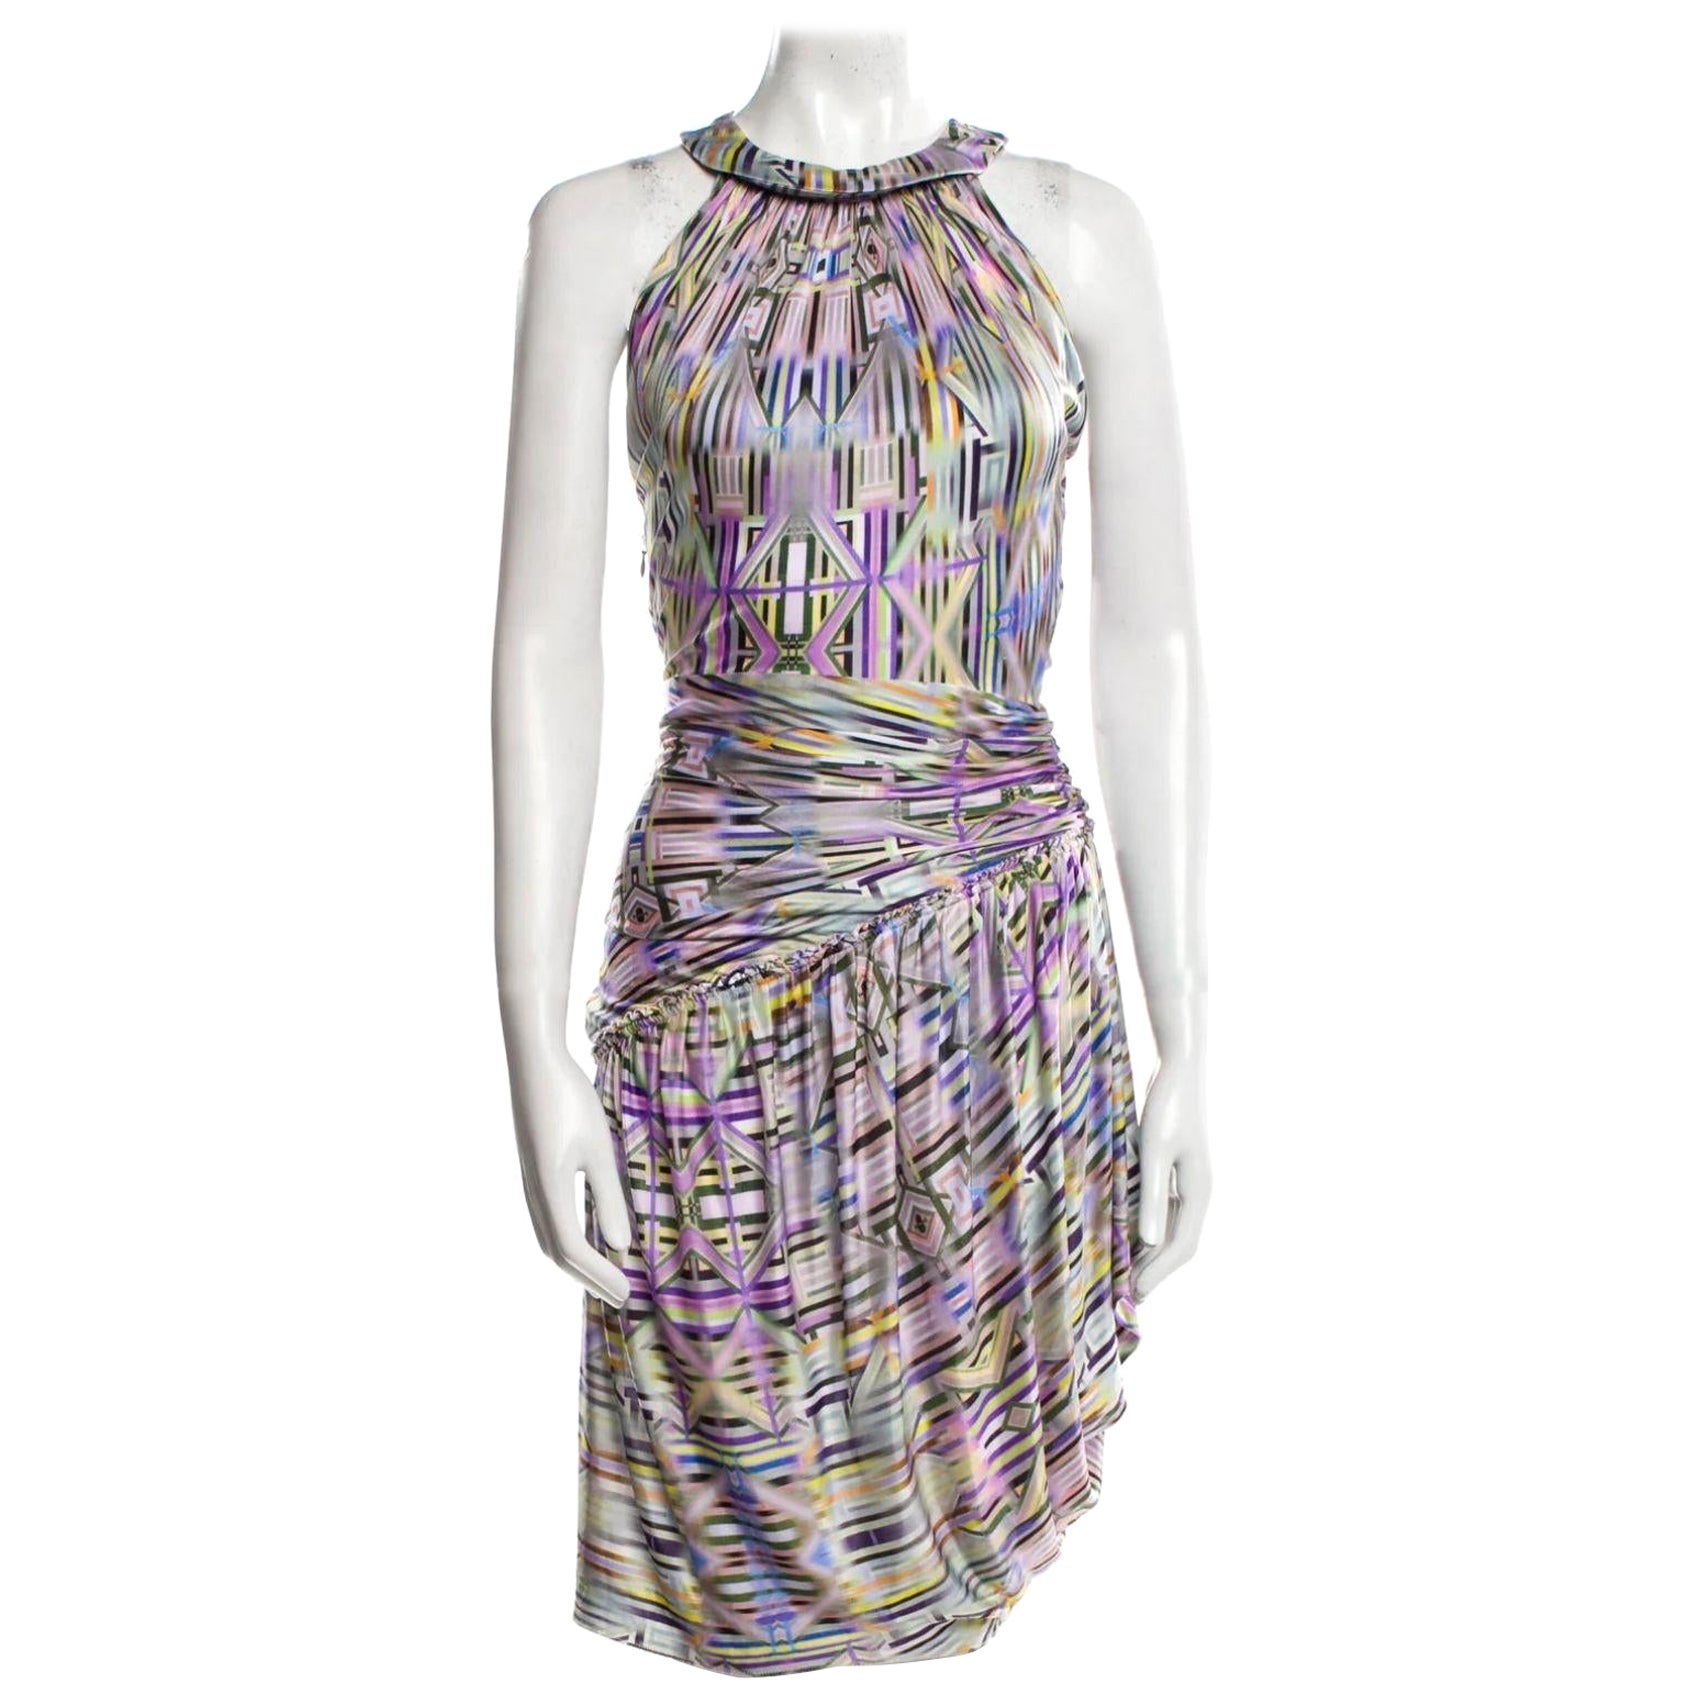 Matthew Williamson: Shoes, Dresses & More - 22 For Sale at 1stdibs |  butterfly by matthew williamson dress, matthew williamson butterfly dress, matthew  williamson clothing